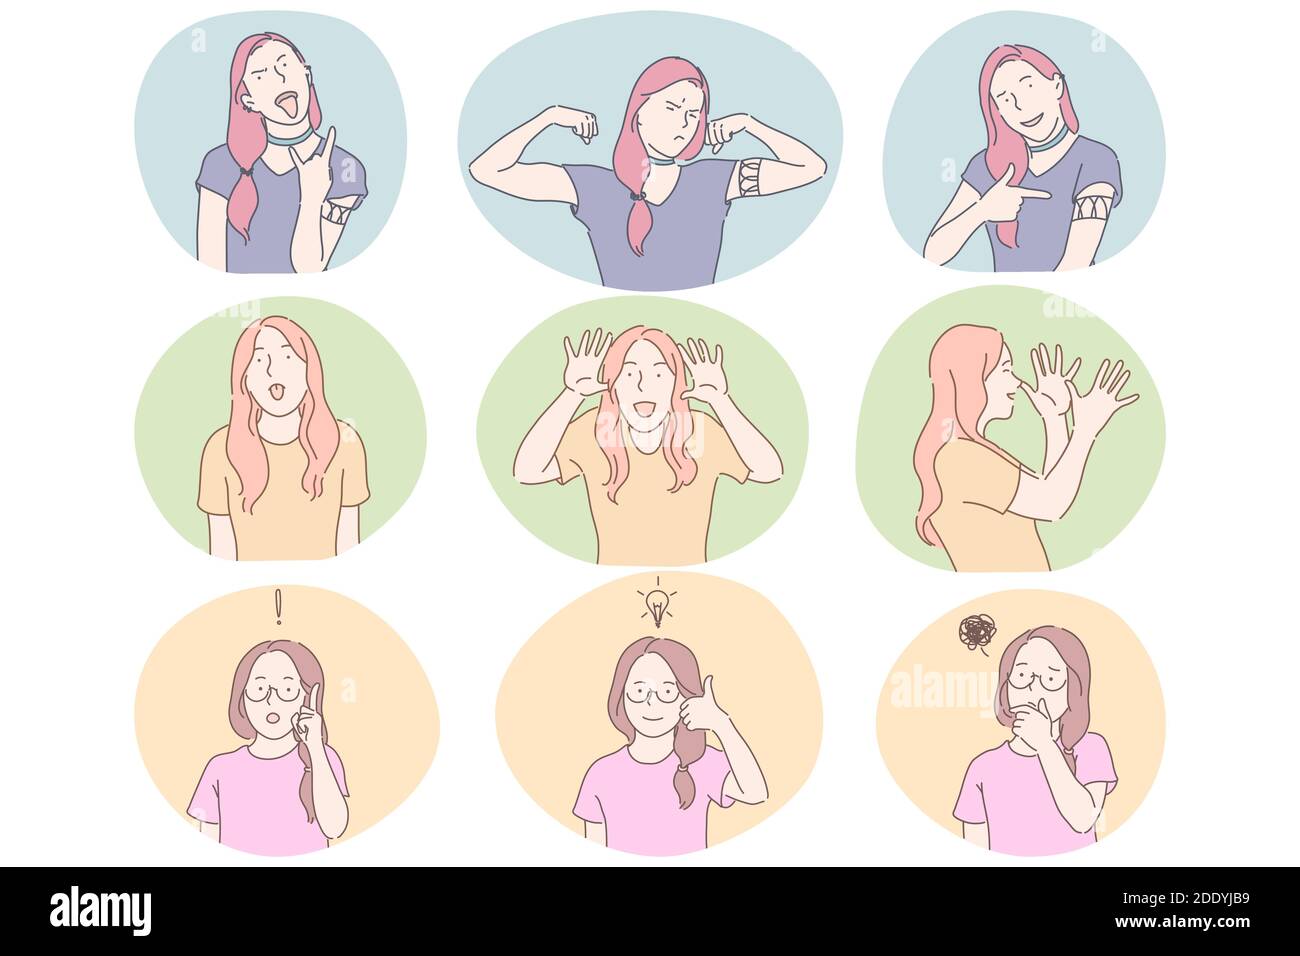 Sign language, gestures, hands and facial expression communication concept.  Young girls cartoon characters showing cool strength, power, fun, having i  Stock Vector Image & Art - Alamy